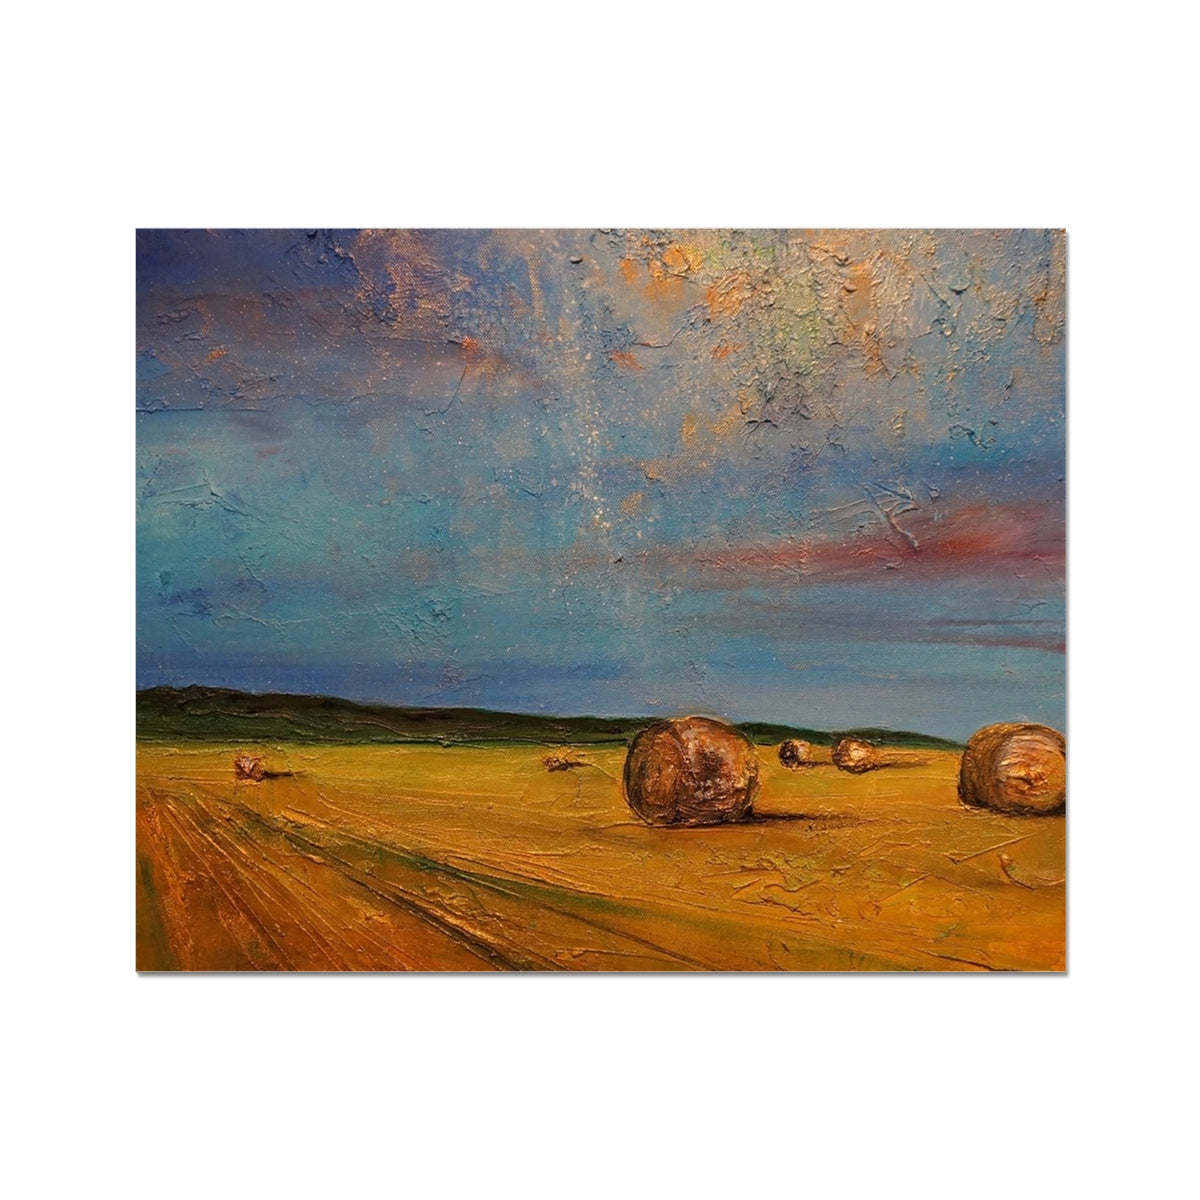 Hay Bales Painting | Artist Proof Collector Prints From Scotland-Artist Proof Collector Prints-Scottish Highlands & Lowlands Art Gallery-20"x16"-Paintings, Prints, Homeware, Art Gifts From Scotland By Scottish Artist Kevin Hunter